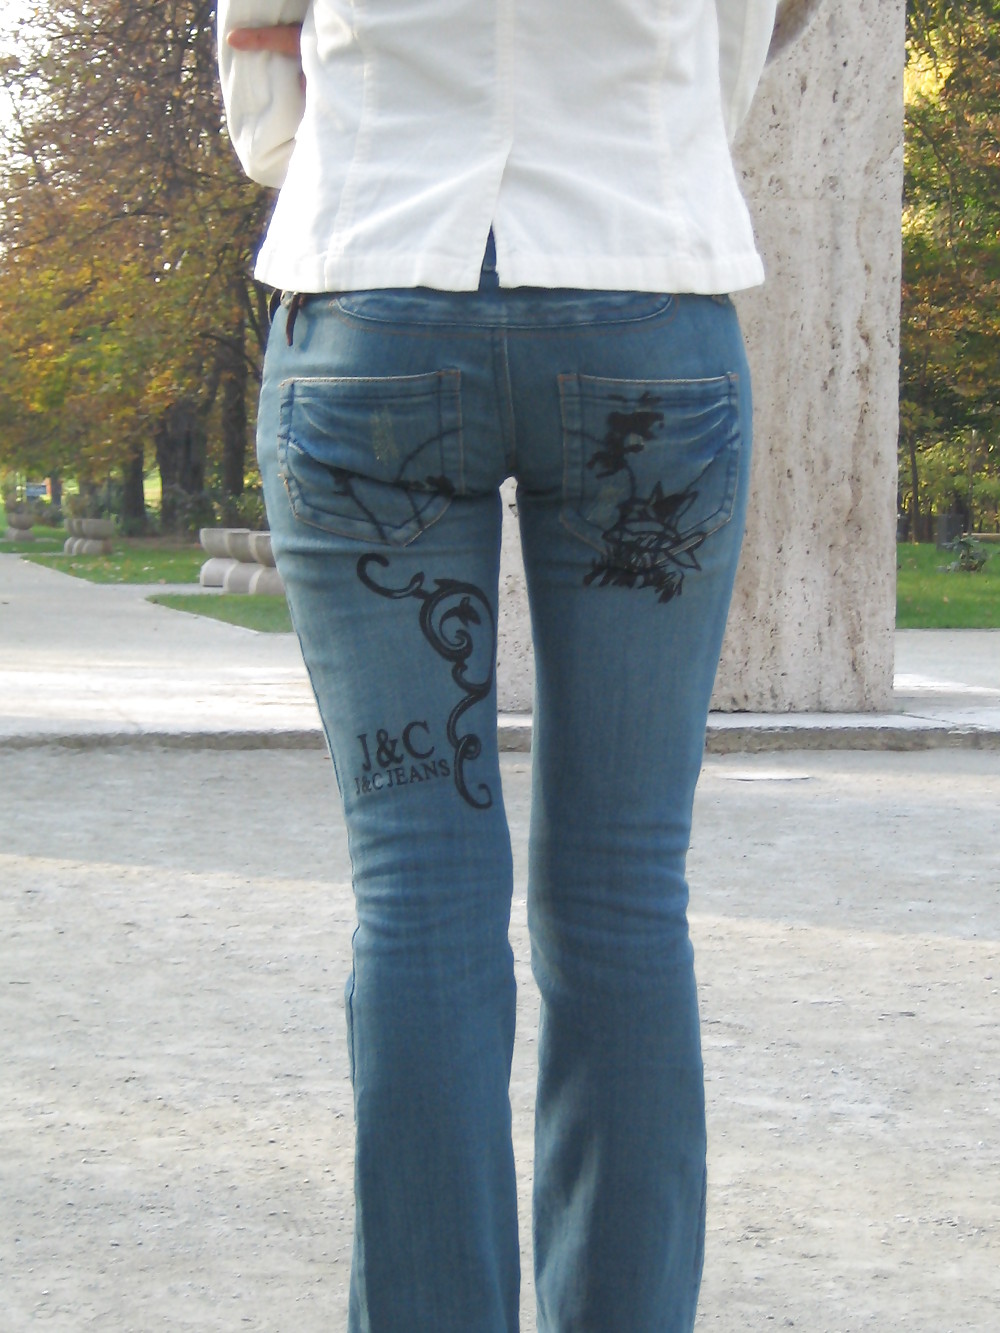 My Jeans #3701764